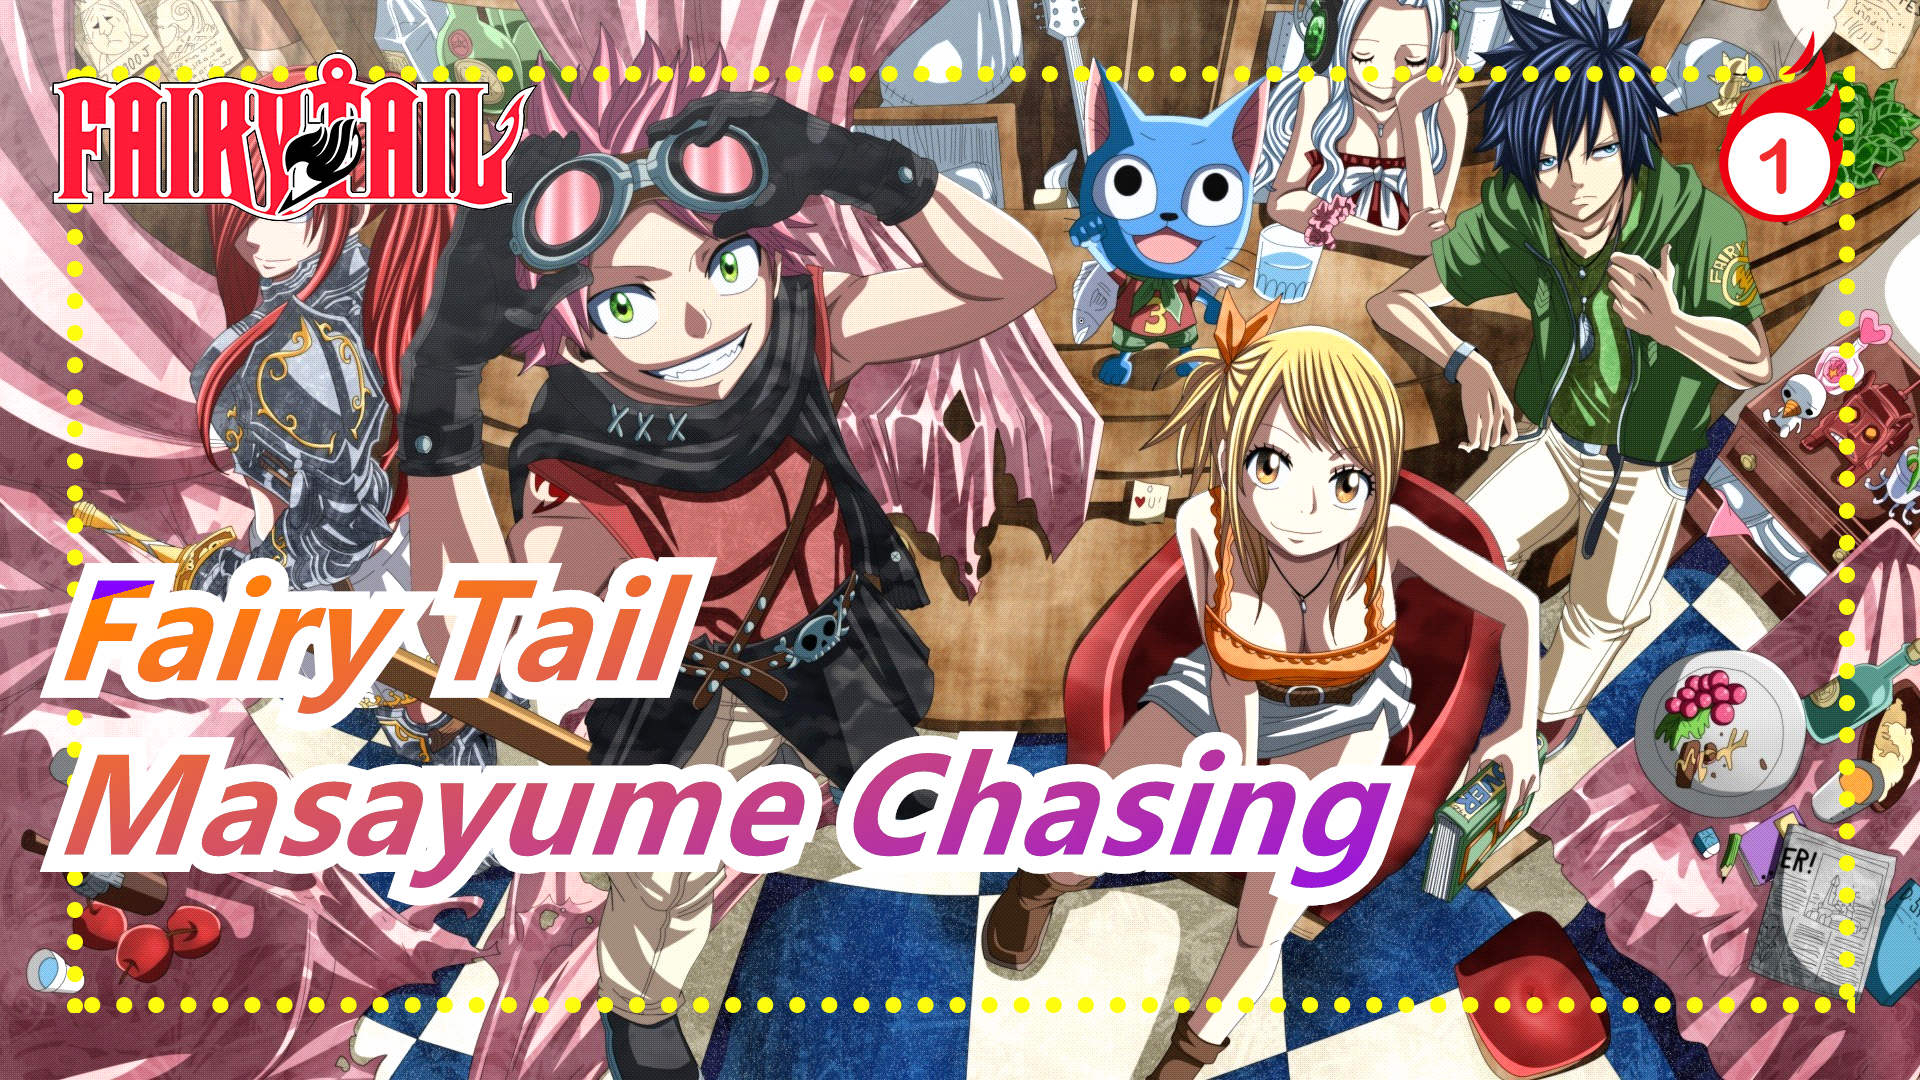 Fairy Tail|[To you who have been protecting Fairy Tail] New remix - BoA -  Masayume Chasing_1 - Bilibili